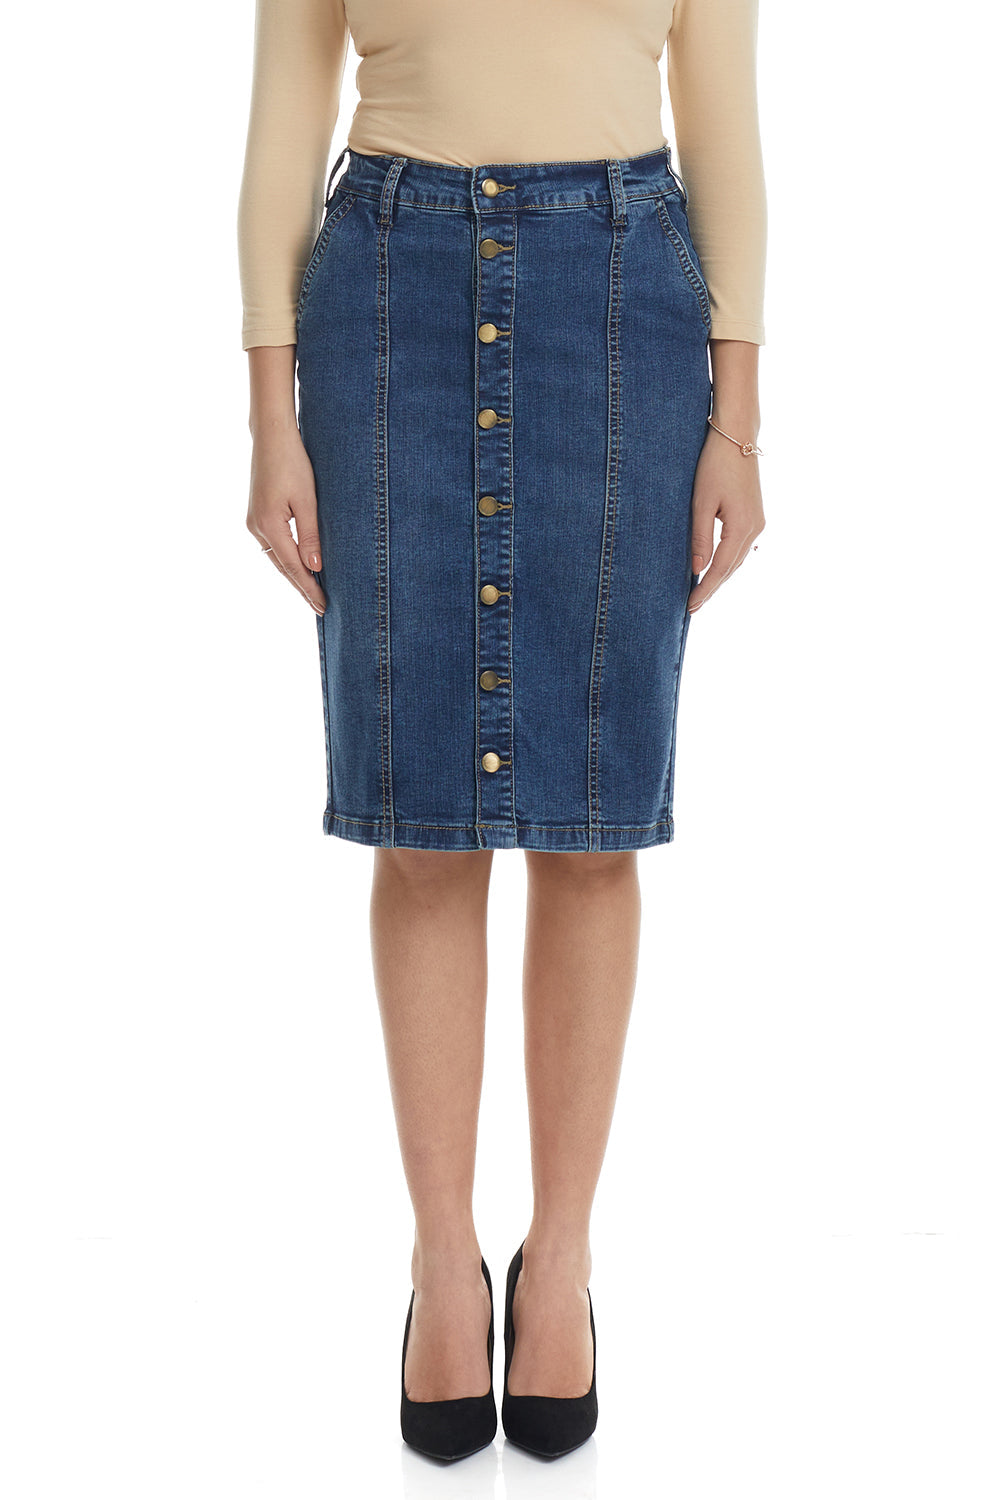 blue button down modest denim jean pencil skirt with pockets and belt loops for women 